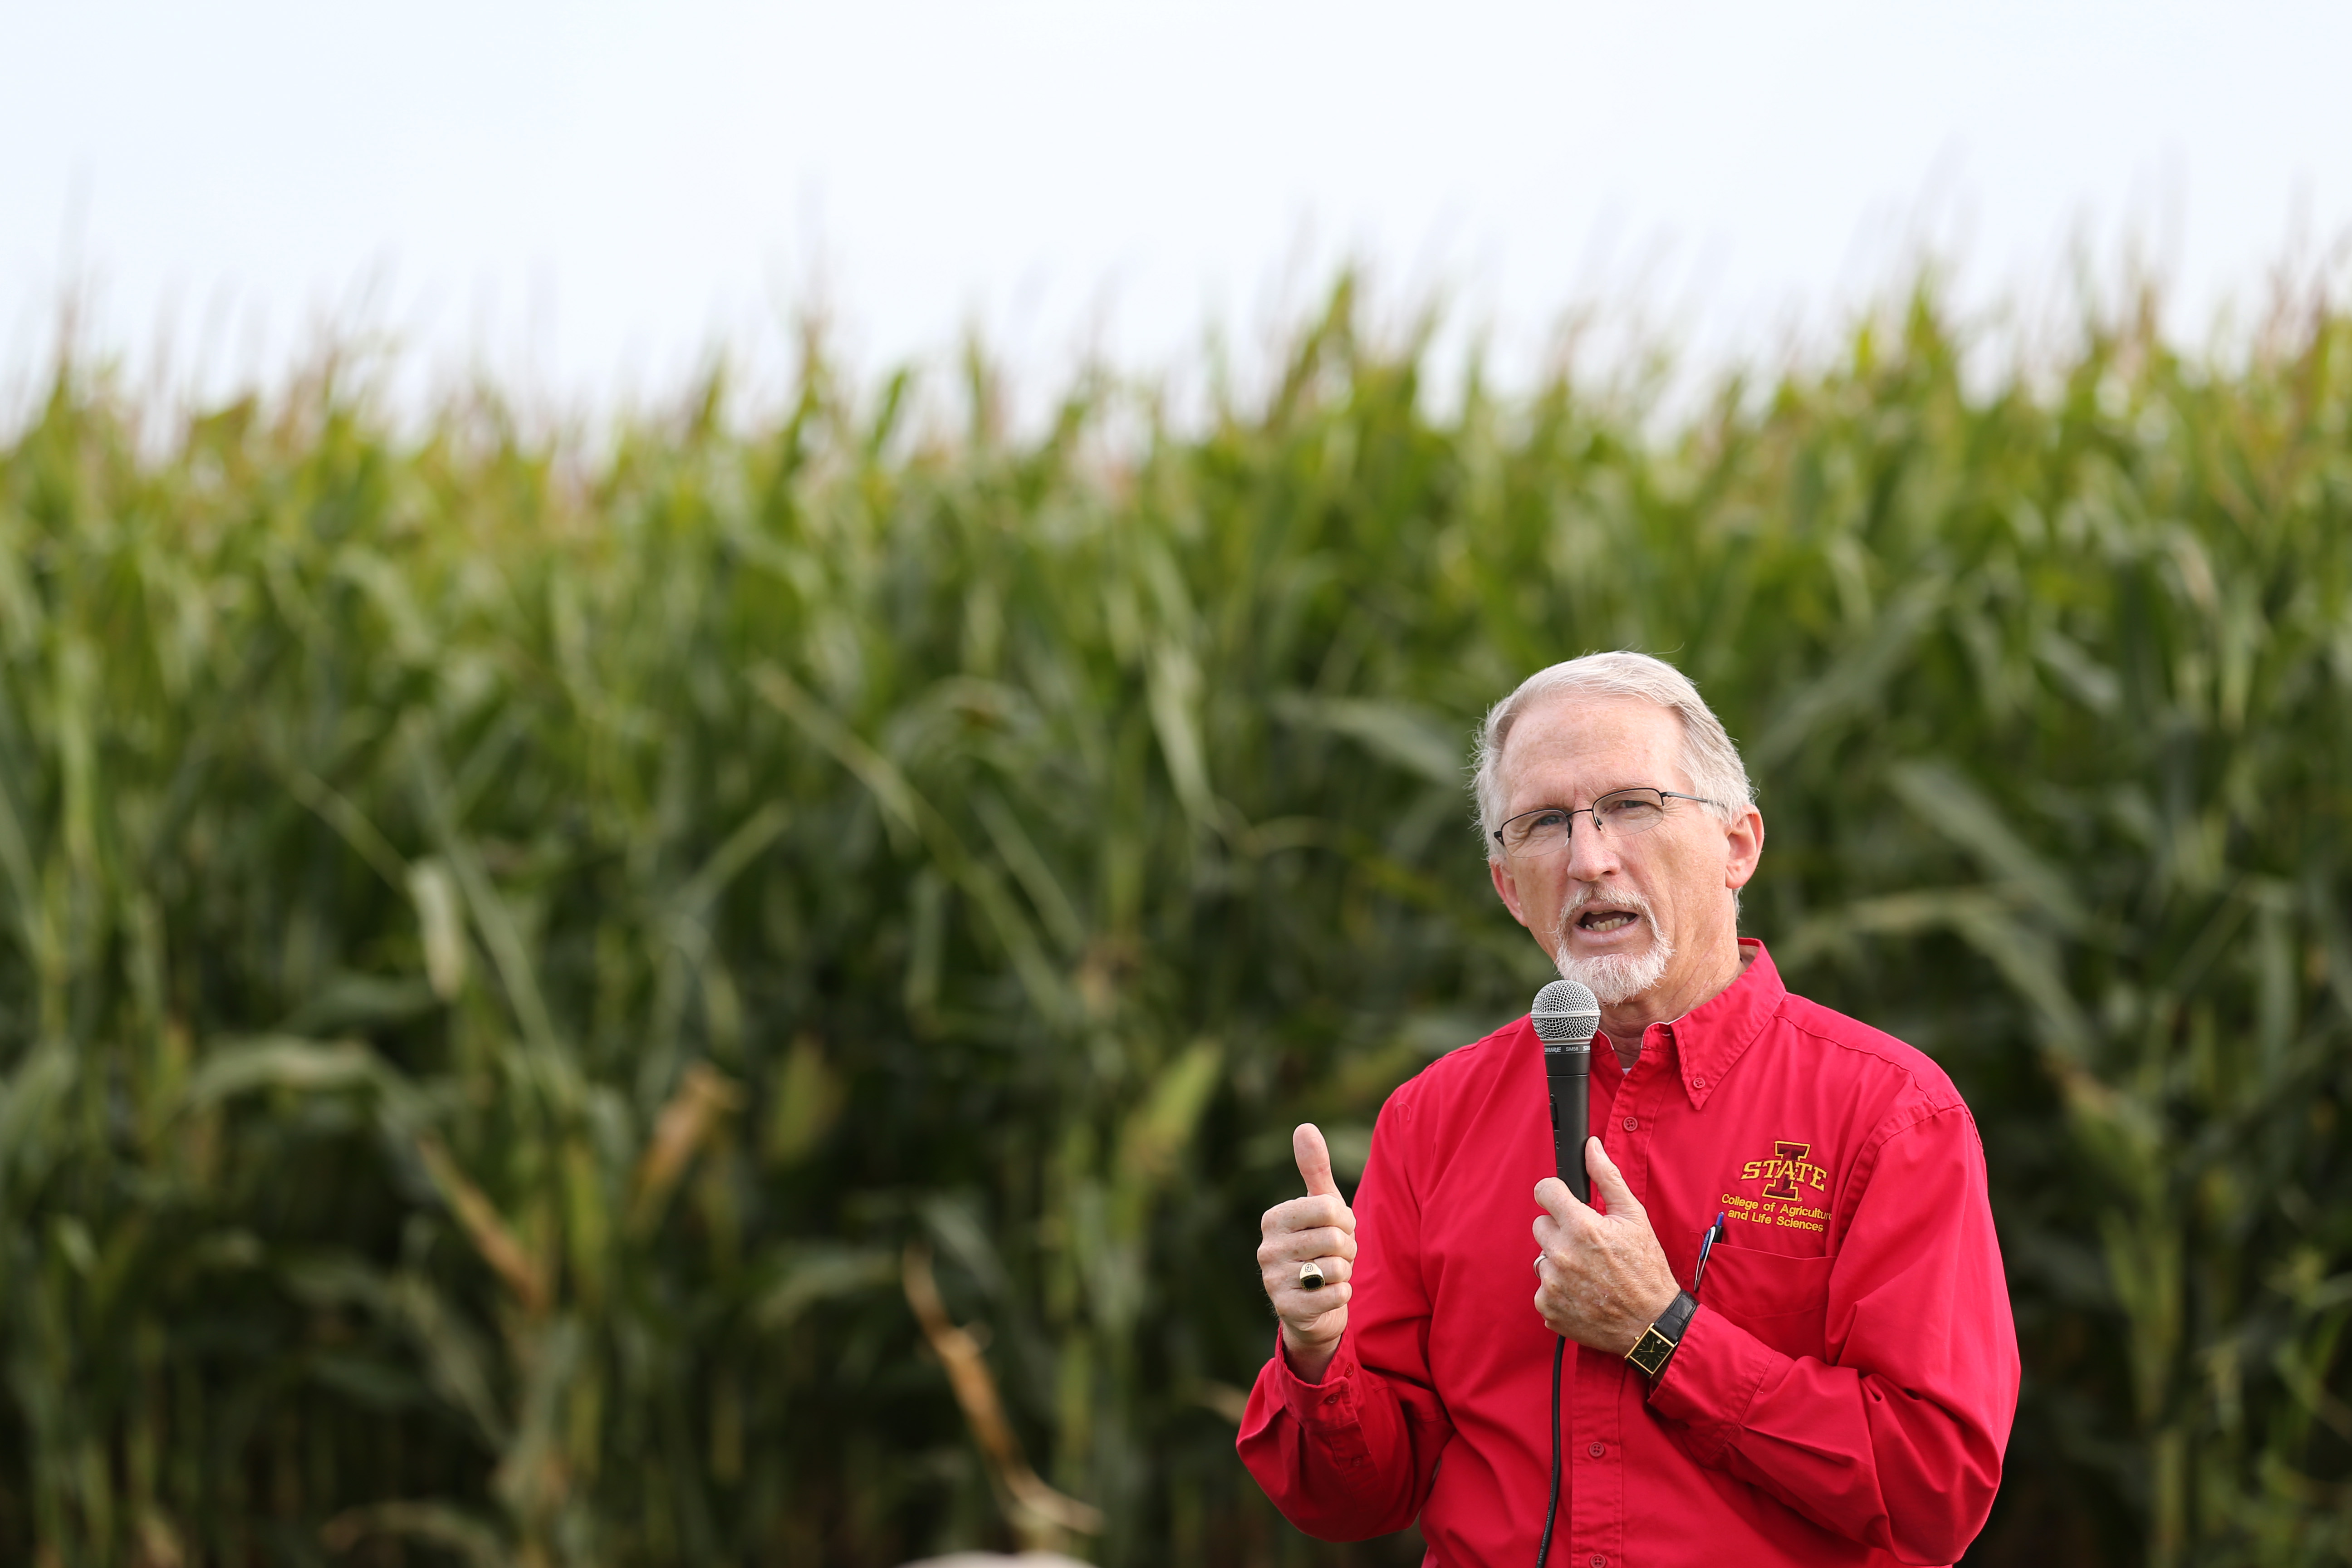 Speaker in front of corn field at Nutrient Reduction Strategies Field Day